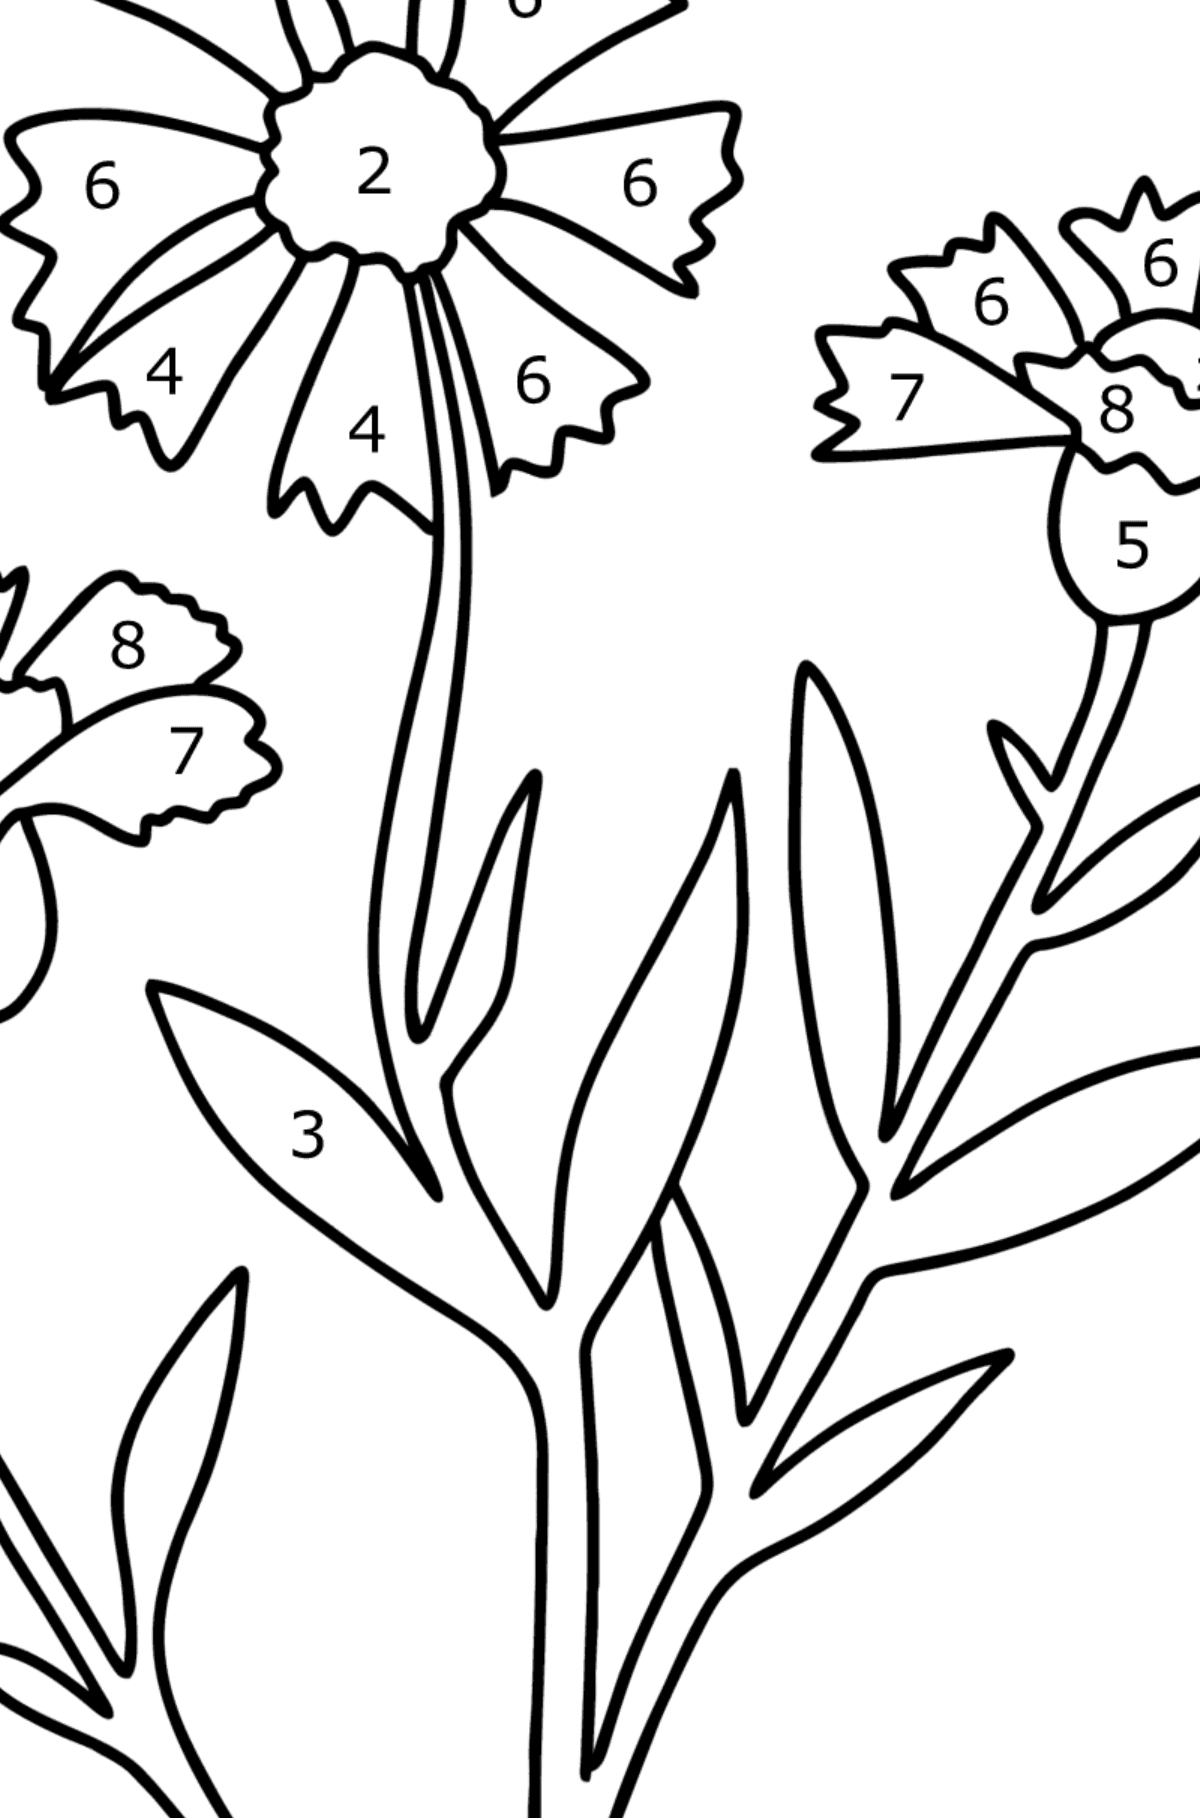 Knapweed coloring page - Coloring by Numbers for Kids